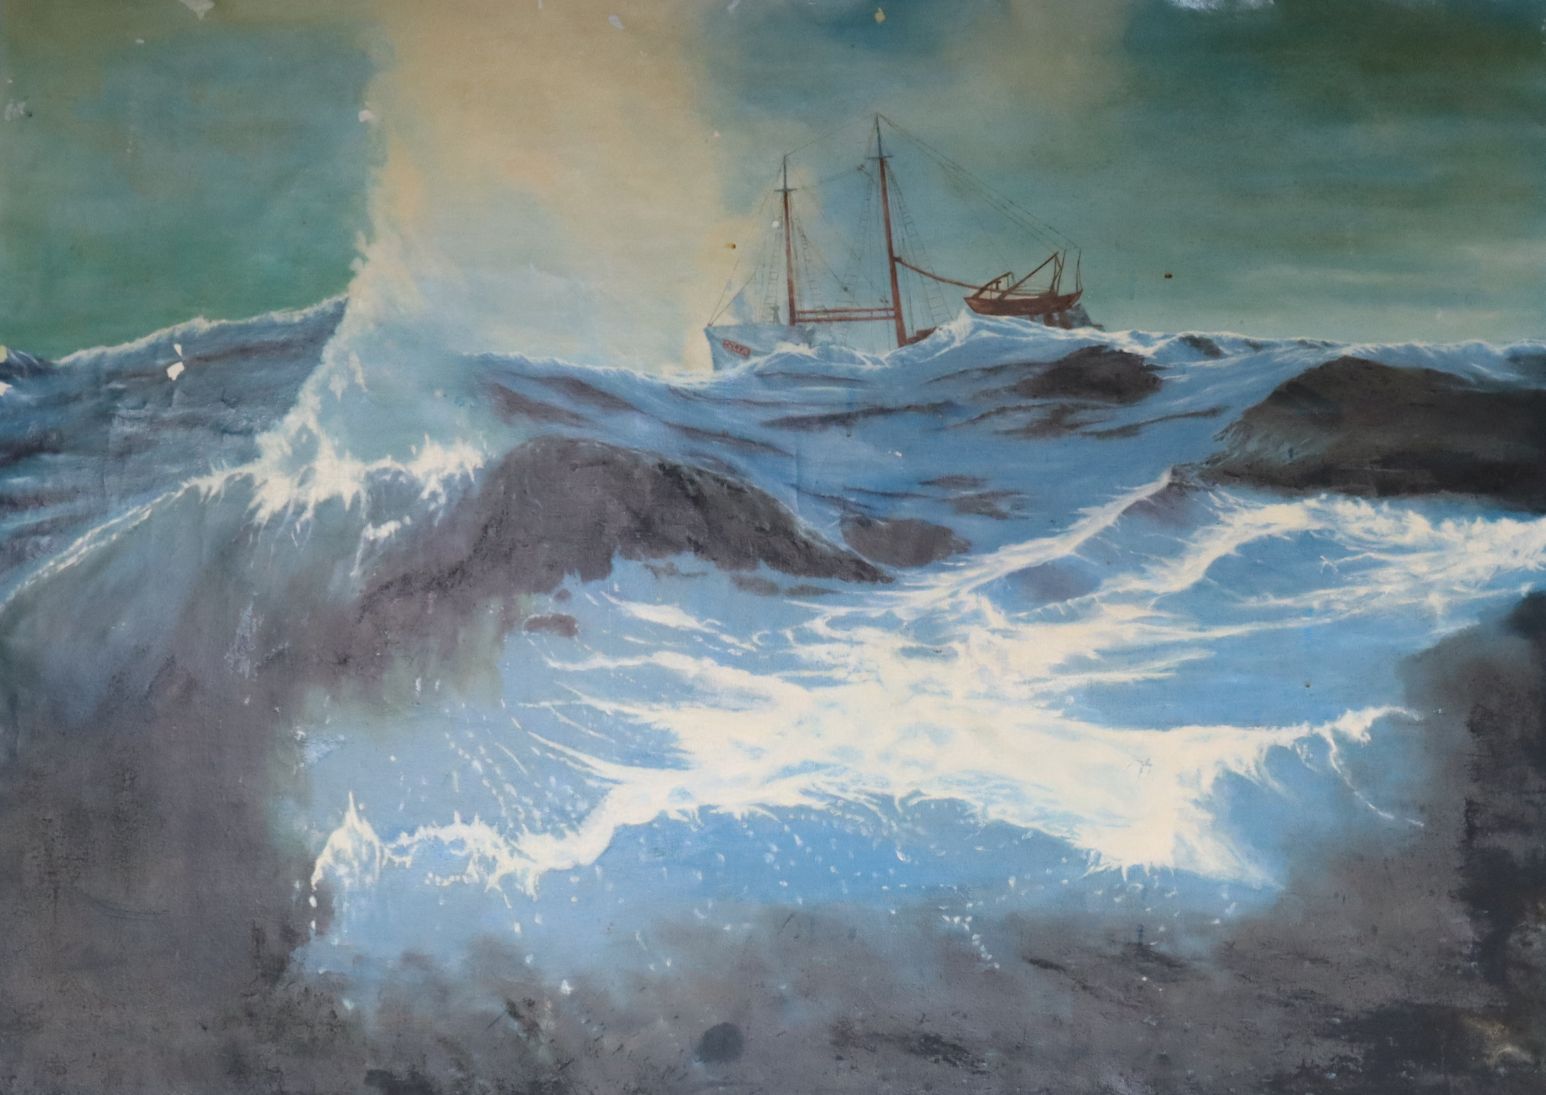 A Mackie, oil on canvas, Trawler 'Celia' on the high seas, signed, 81 x 111cm unframed. - Image 2 of 2